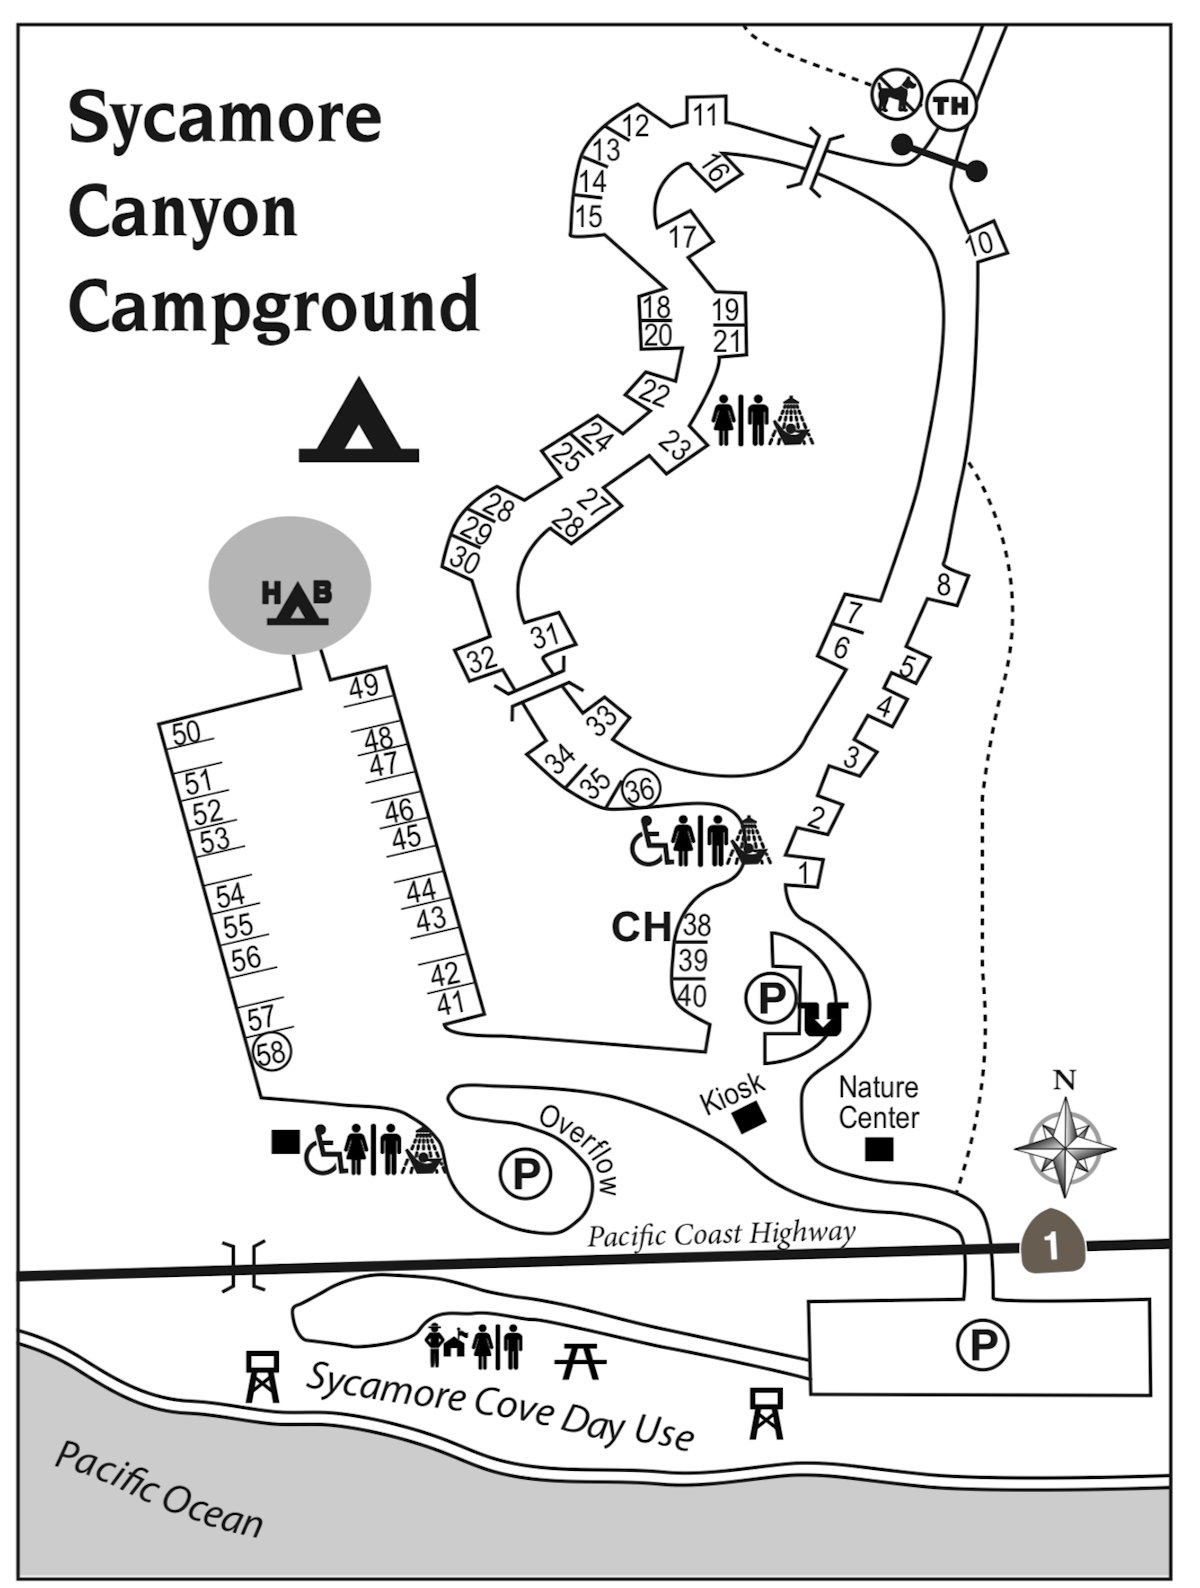 Sycamore Canyon Campground All You Need to Know